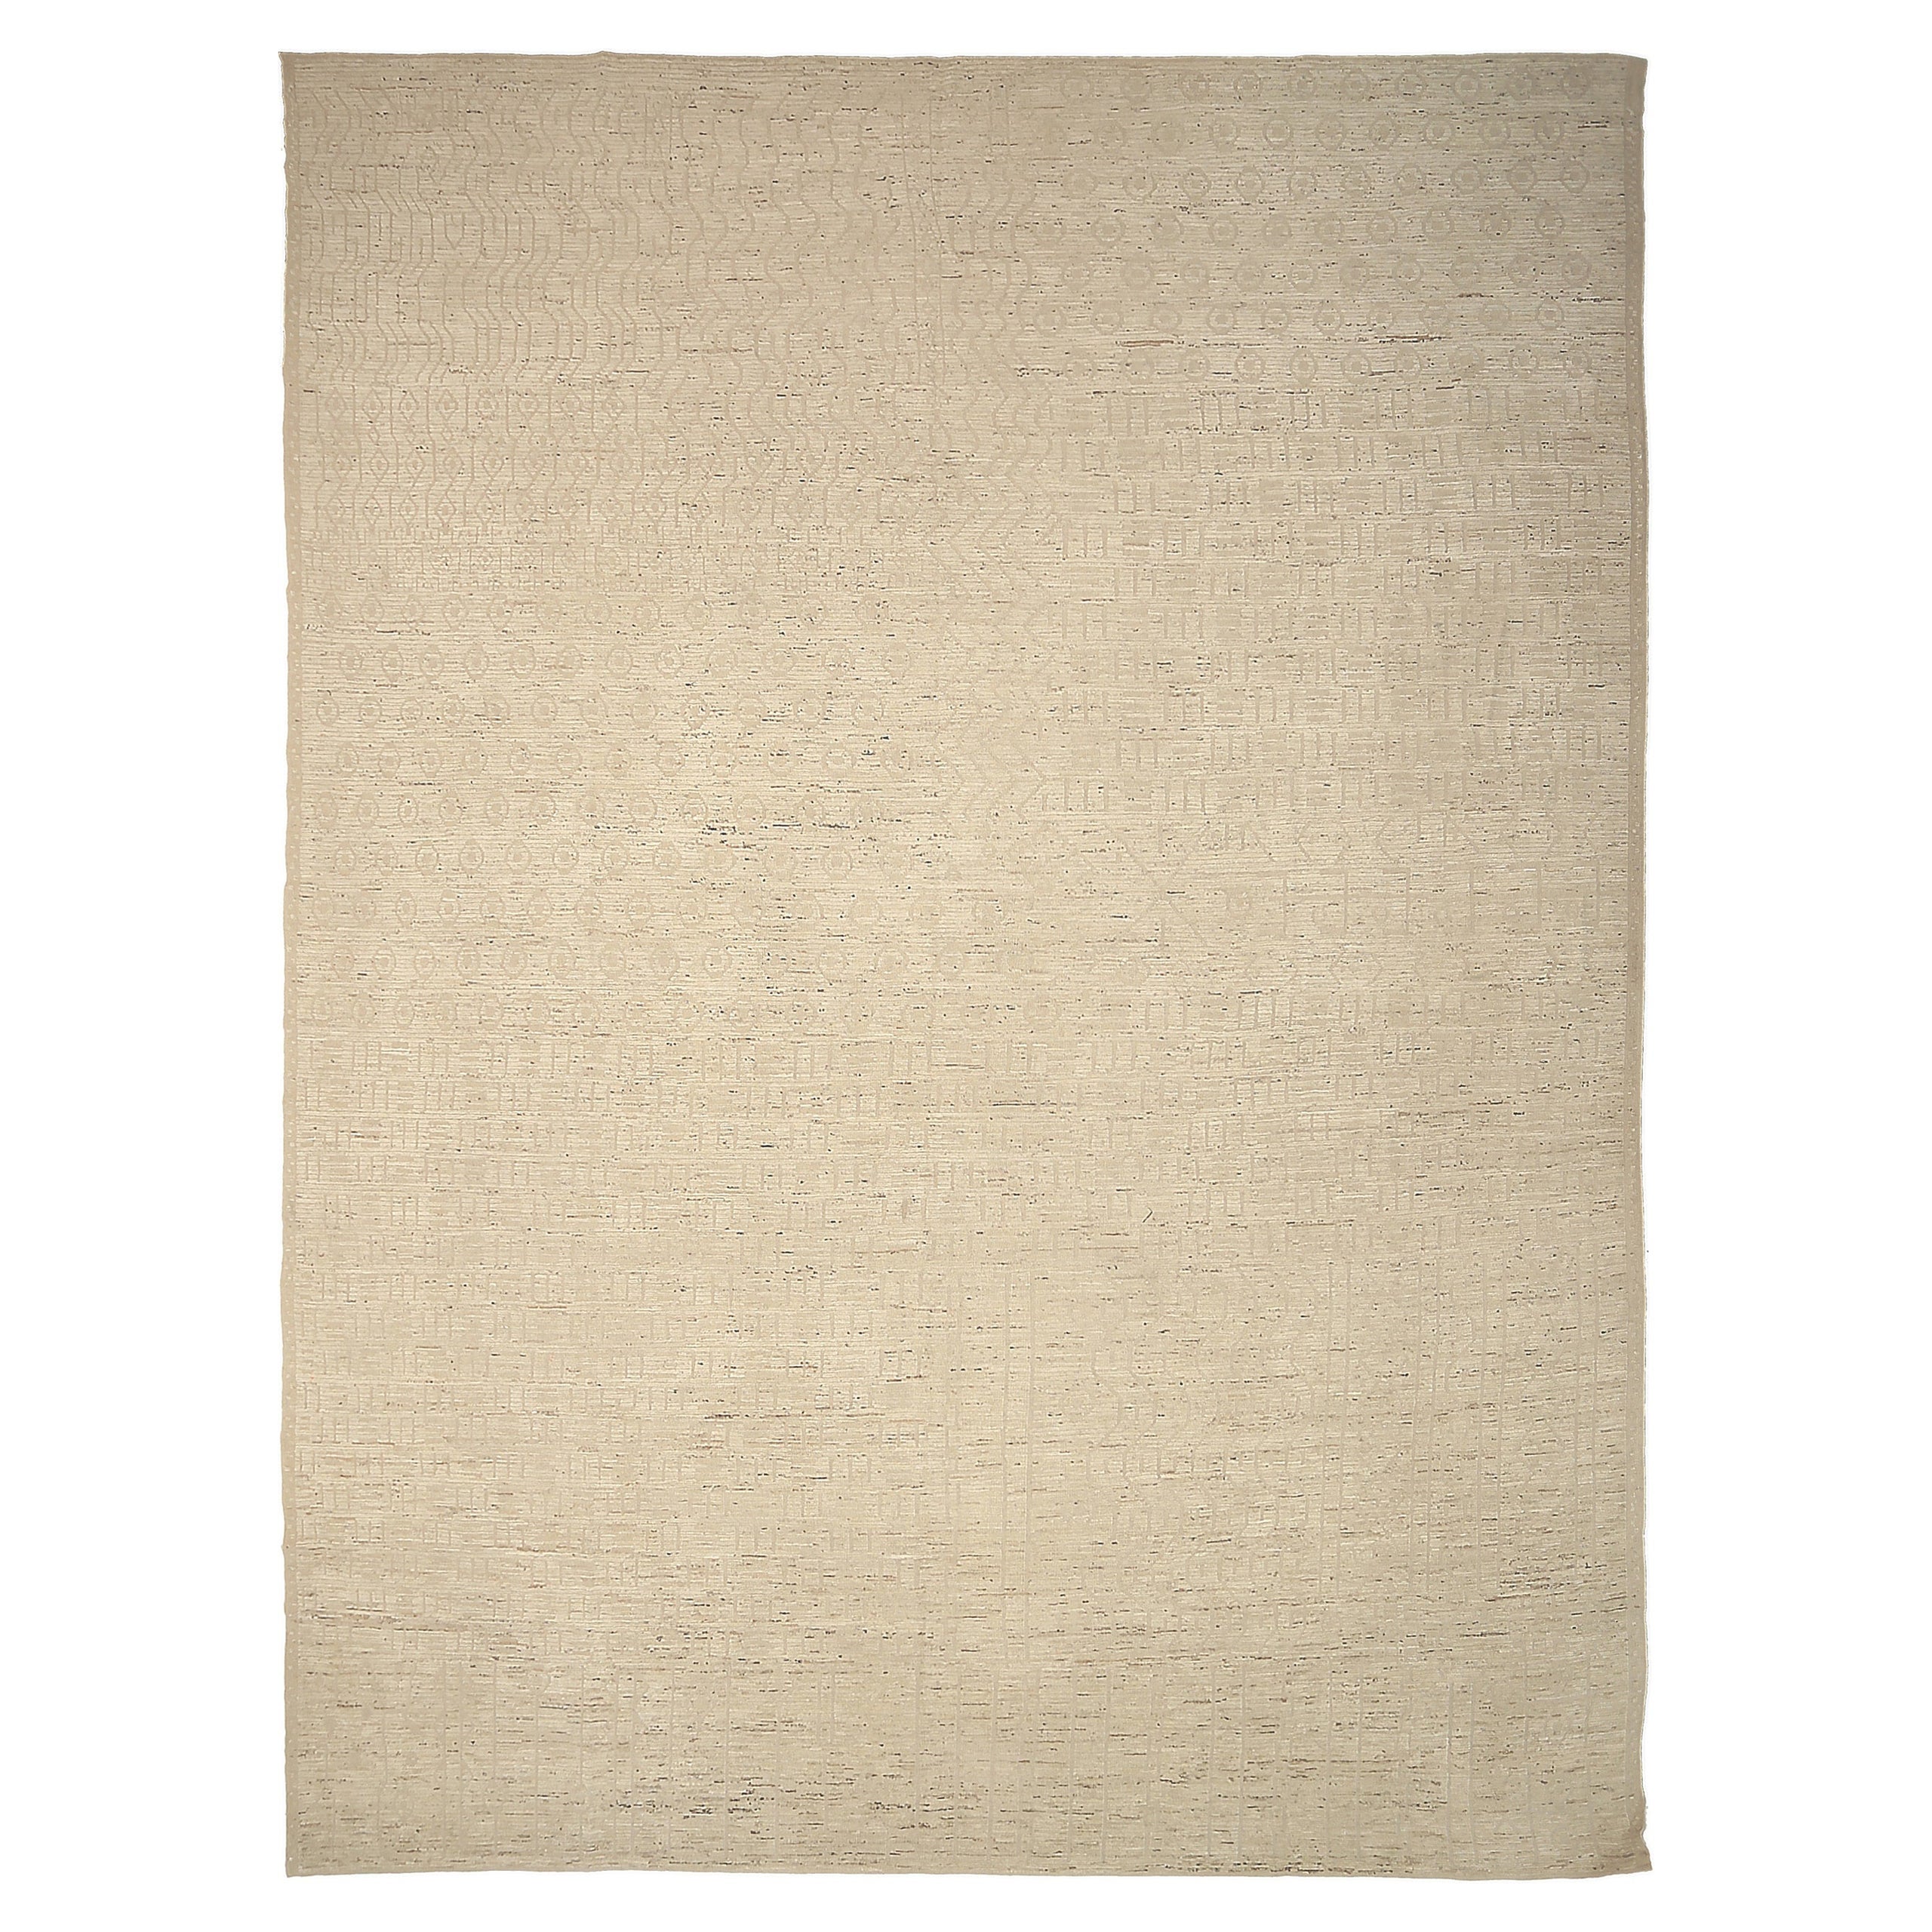 Nazmiyal Collection Beige Geometric Modern Distressed Rug. 16 ft x 20 ft 10 in